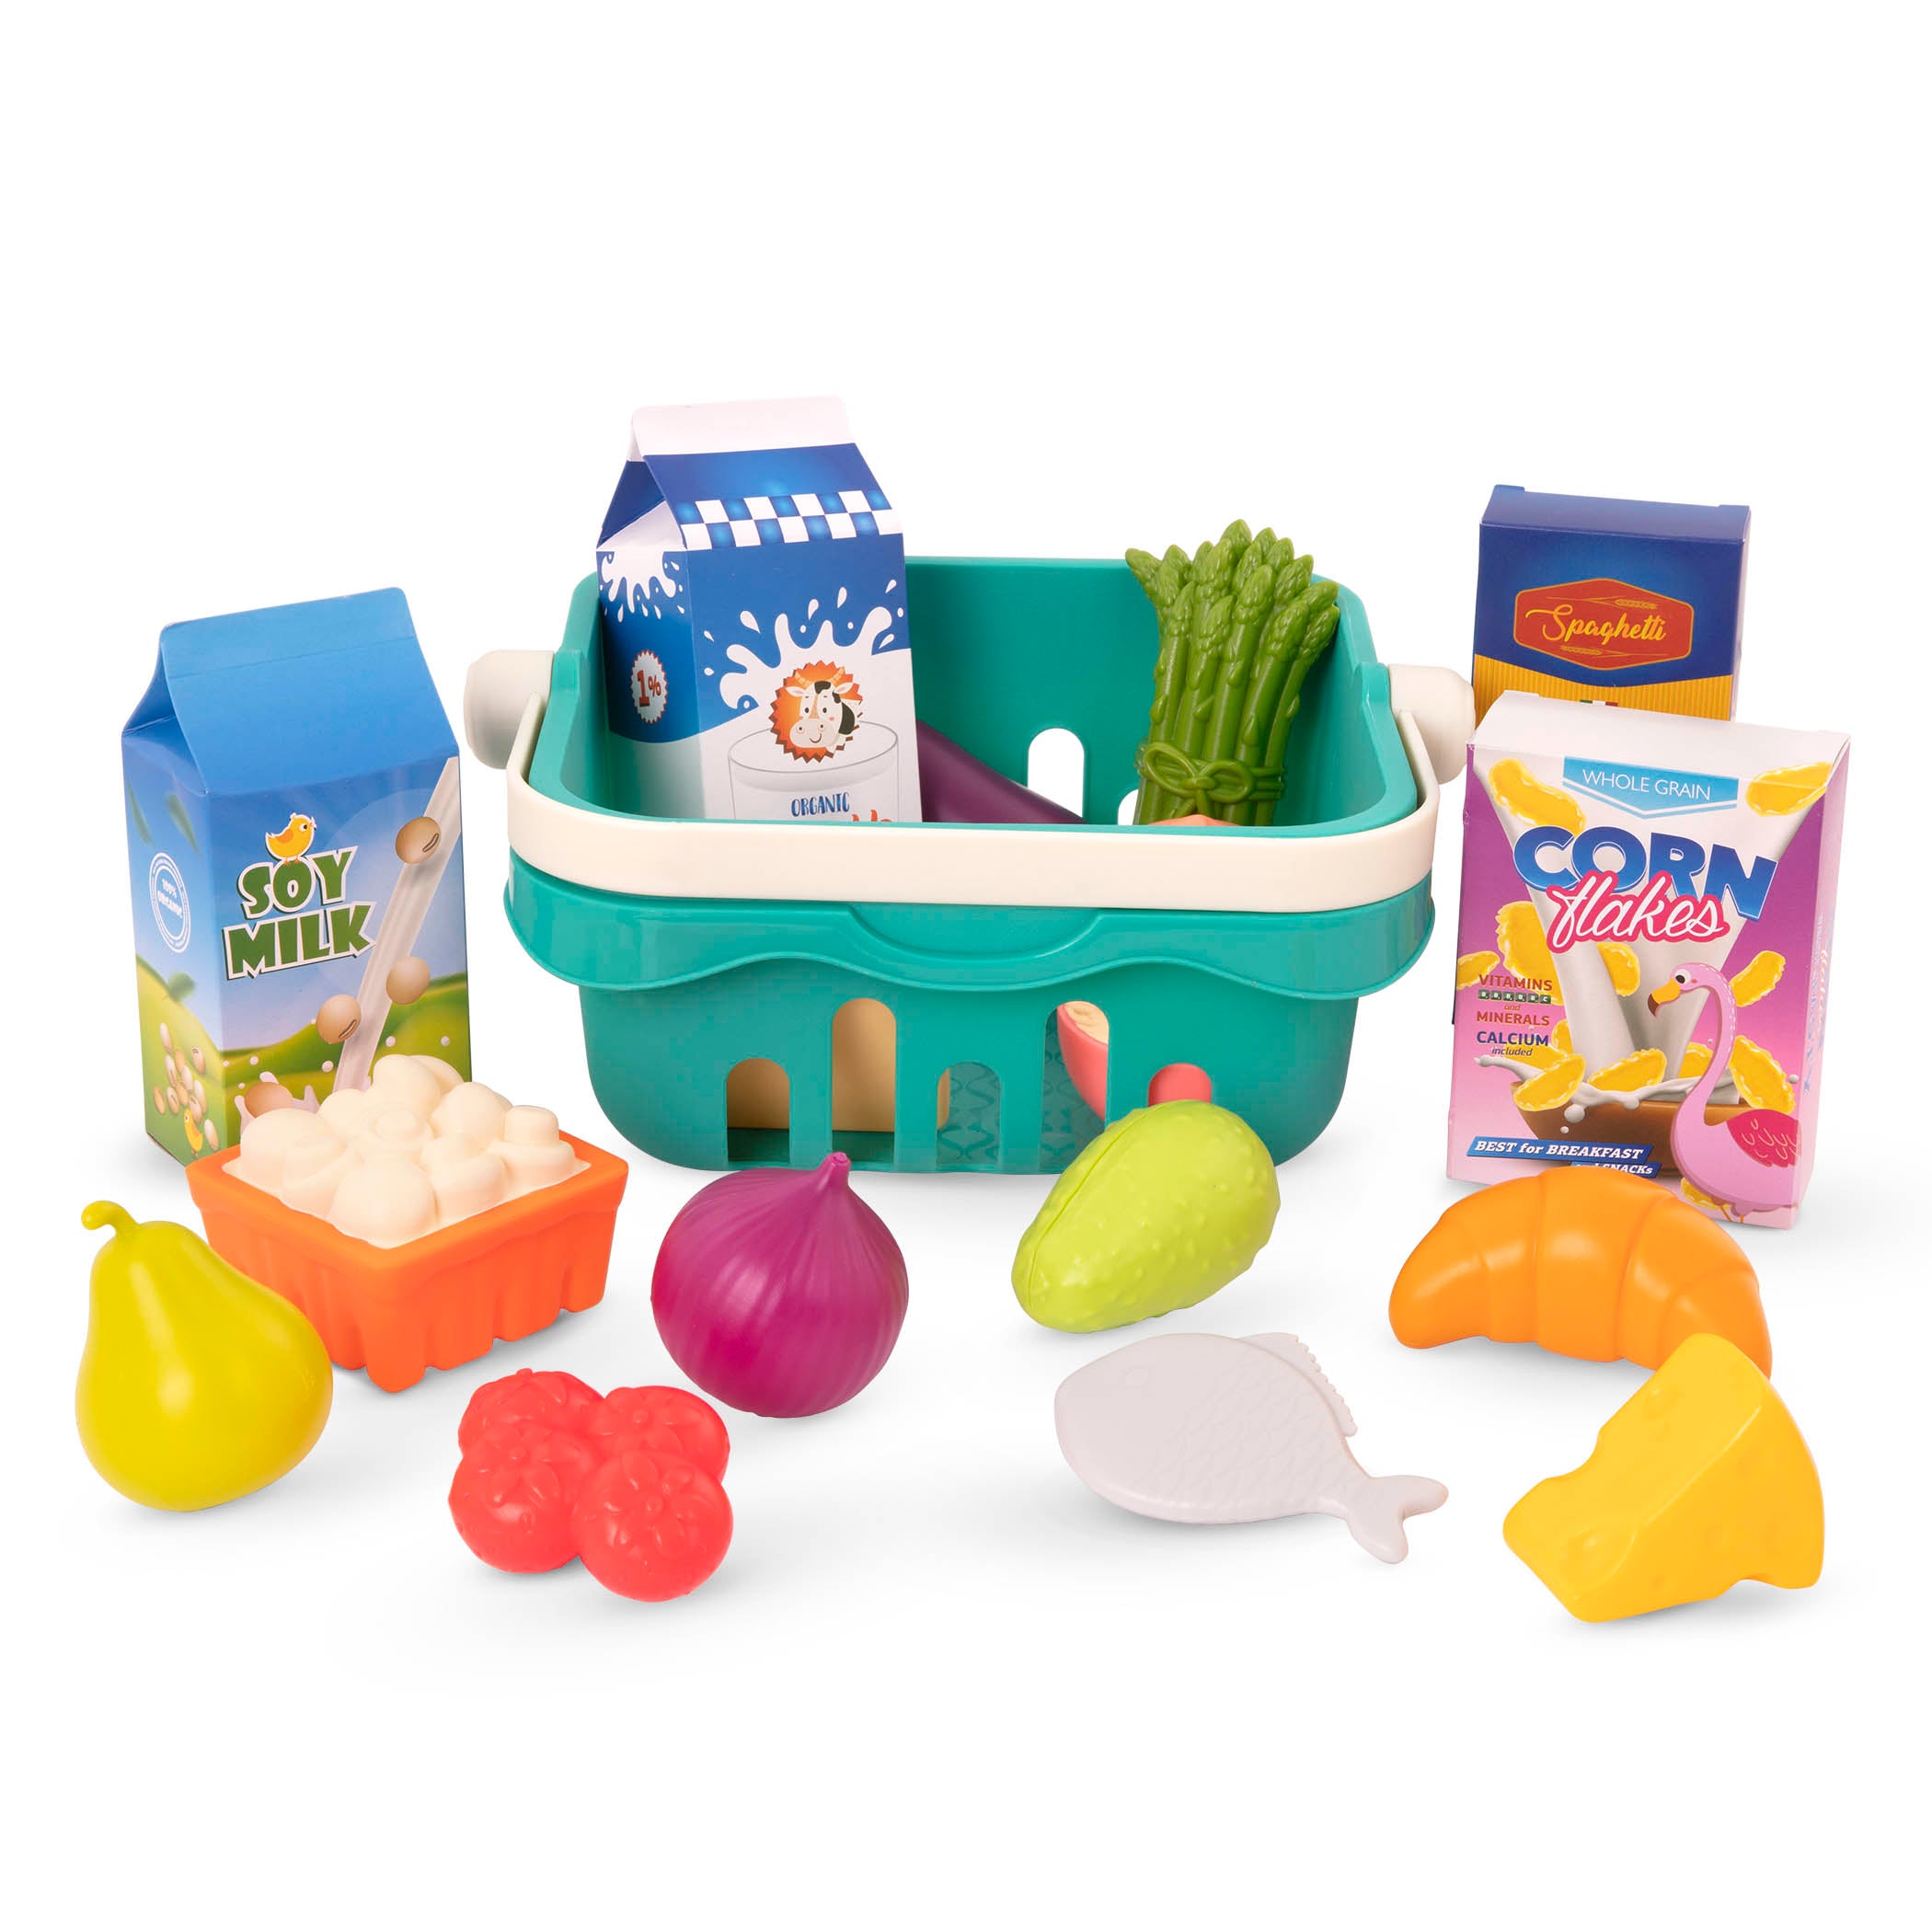 Toy shopping basket with play food.